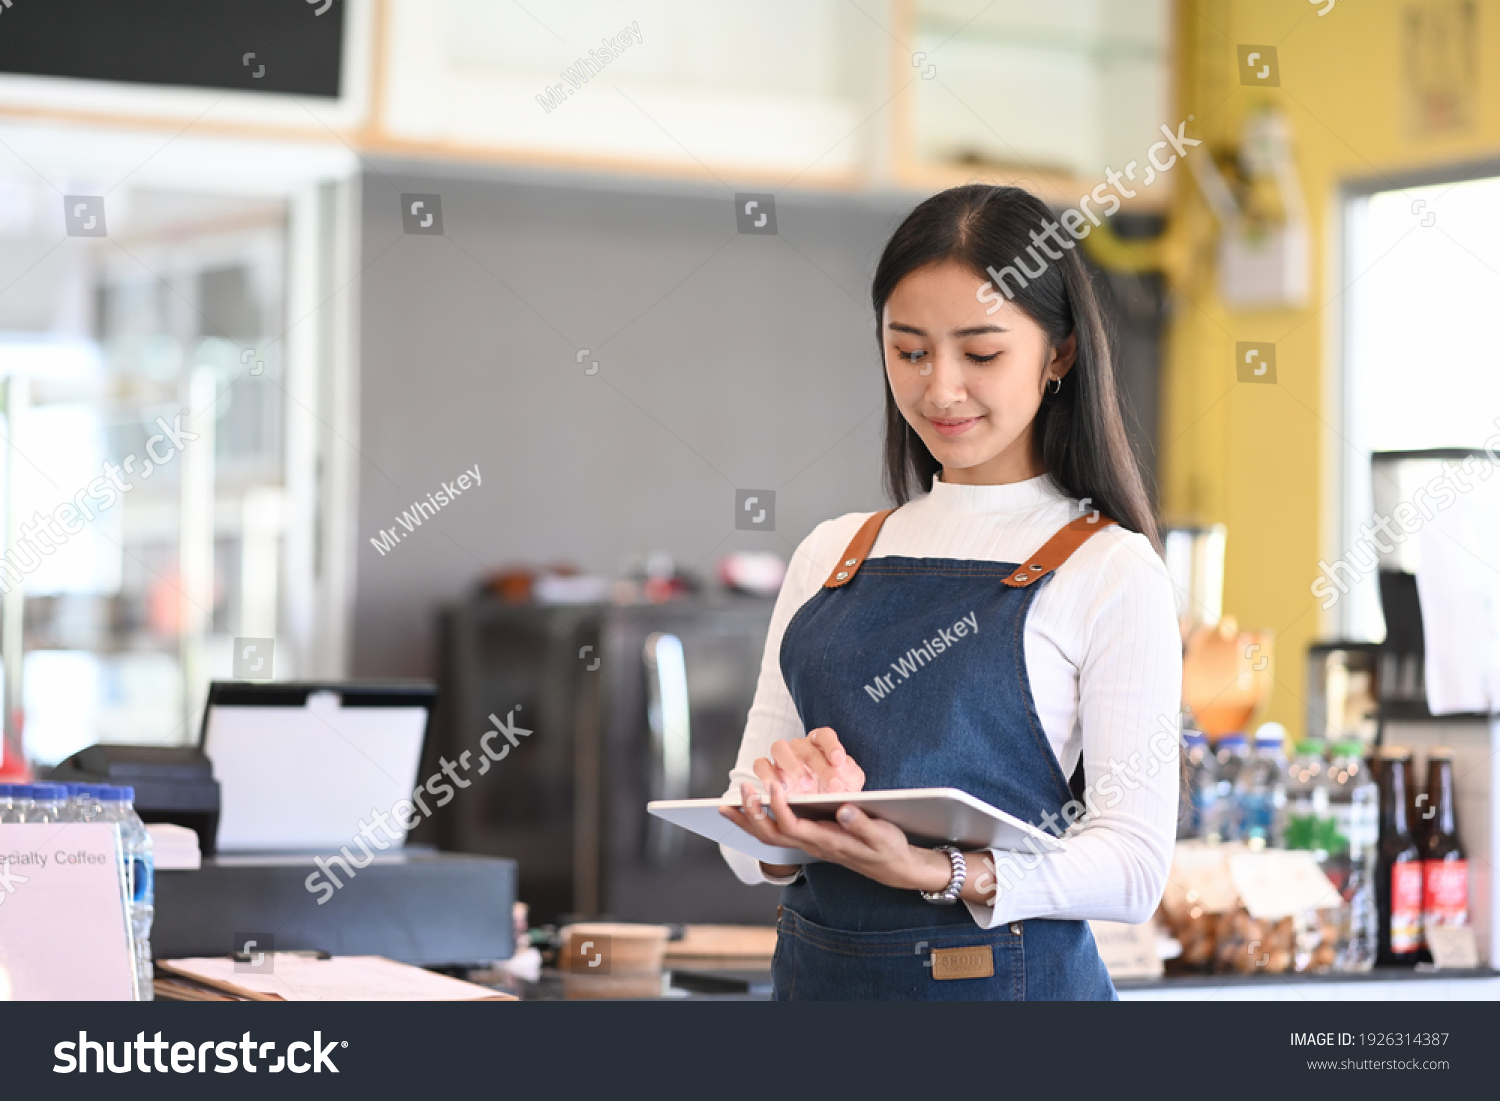 Young Woman Coffee Shop Owner Wearing Stock Photo 1926314387 | Shutterstock